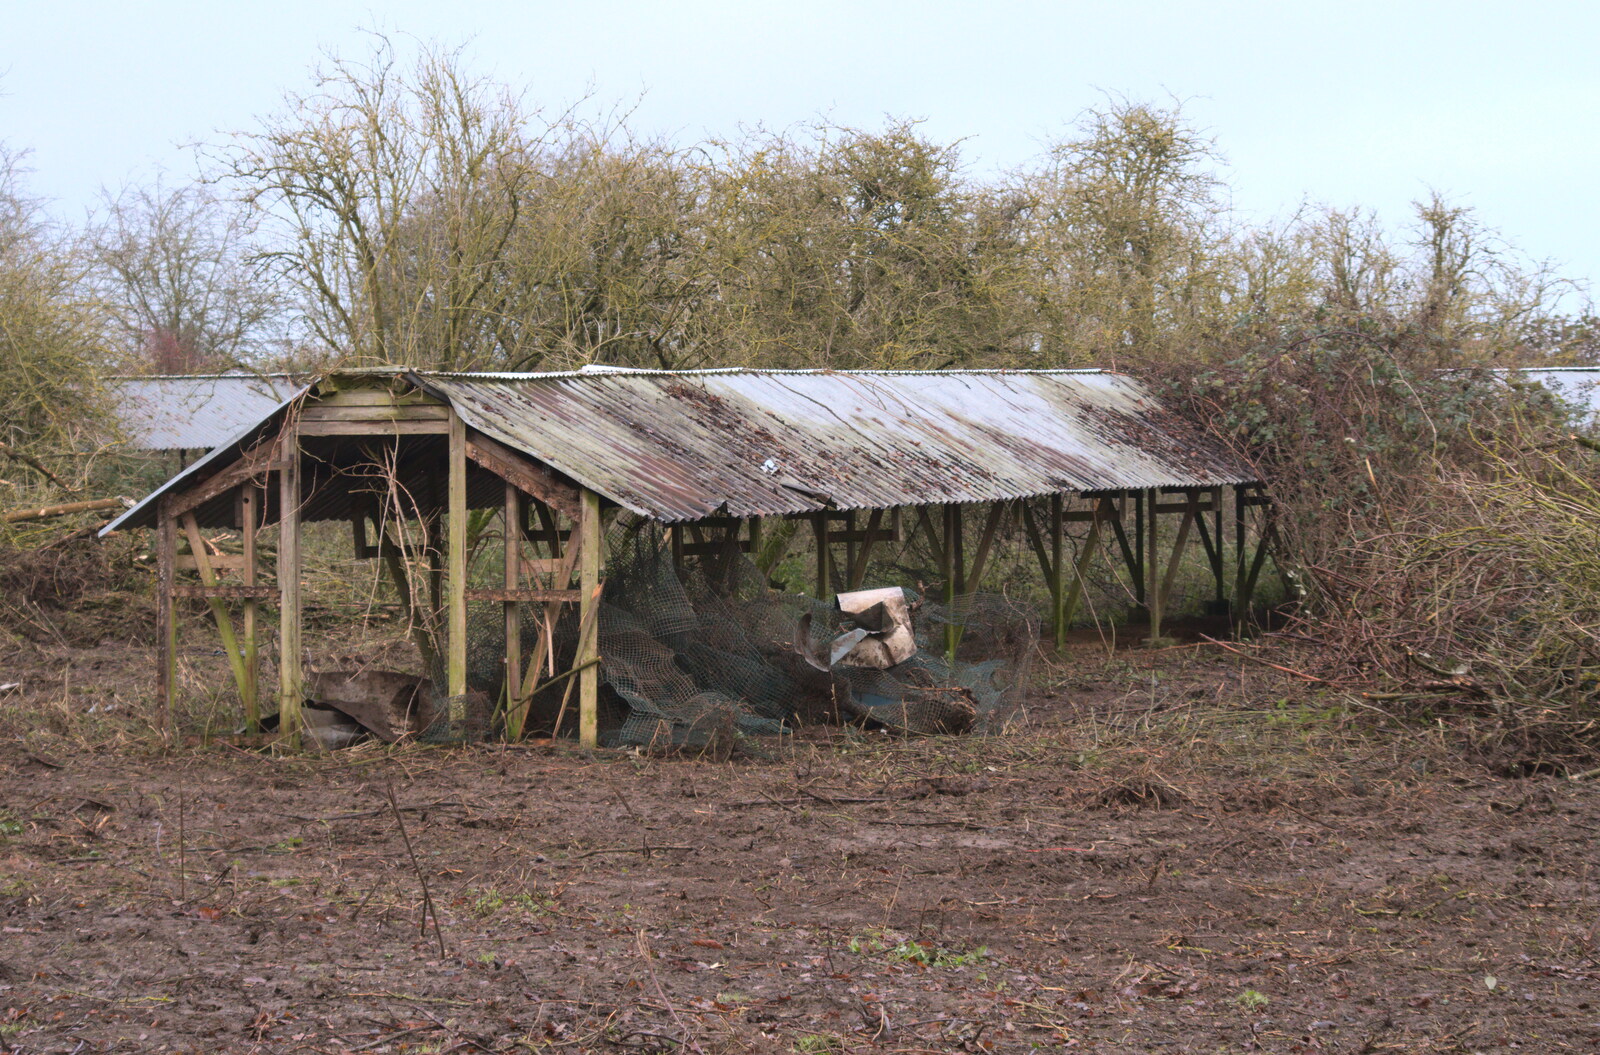 The remains of an old mink shed from More Frosty Rides and the Old Mink Sheds, Brome, Suffolk - 10th December 2020